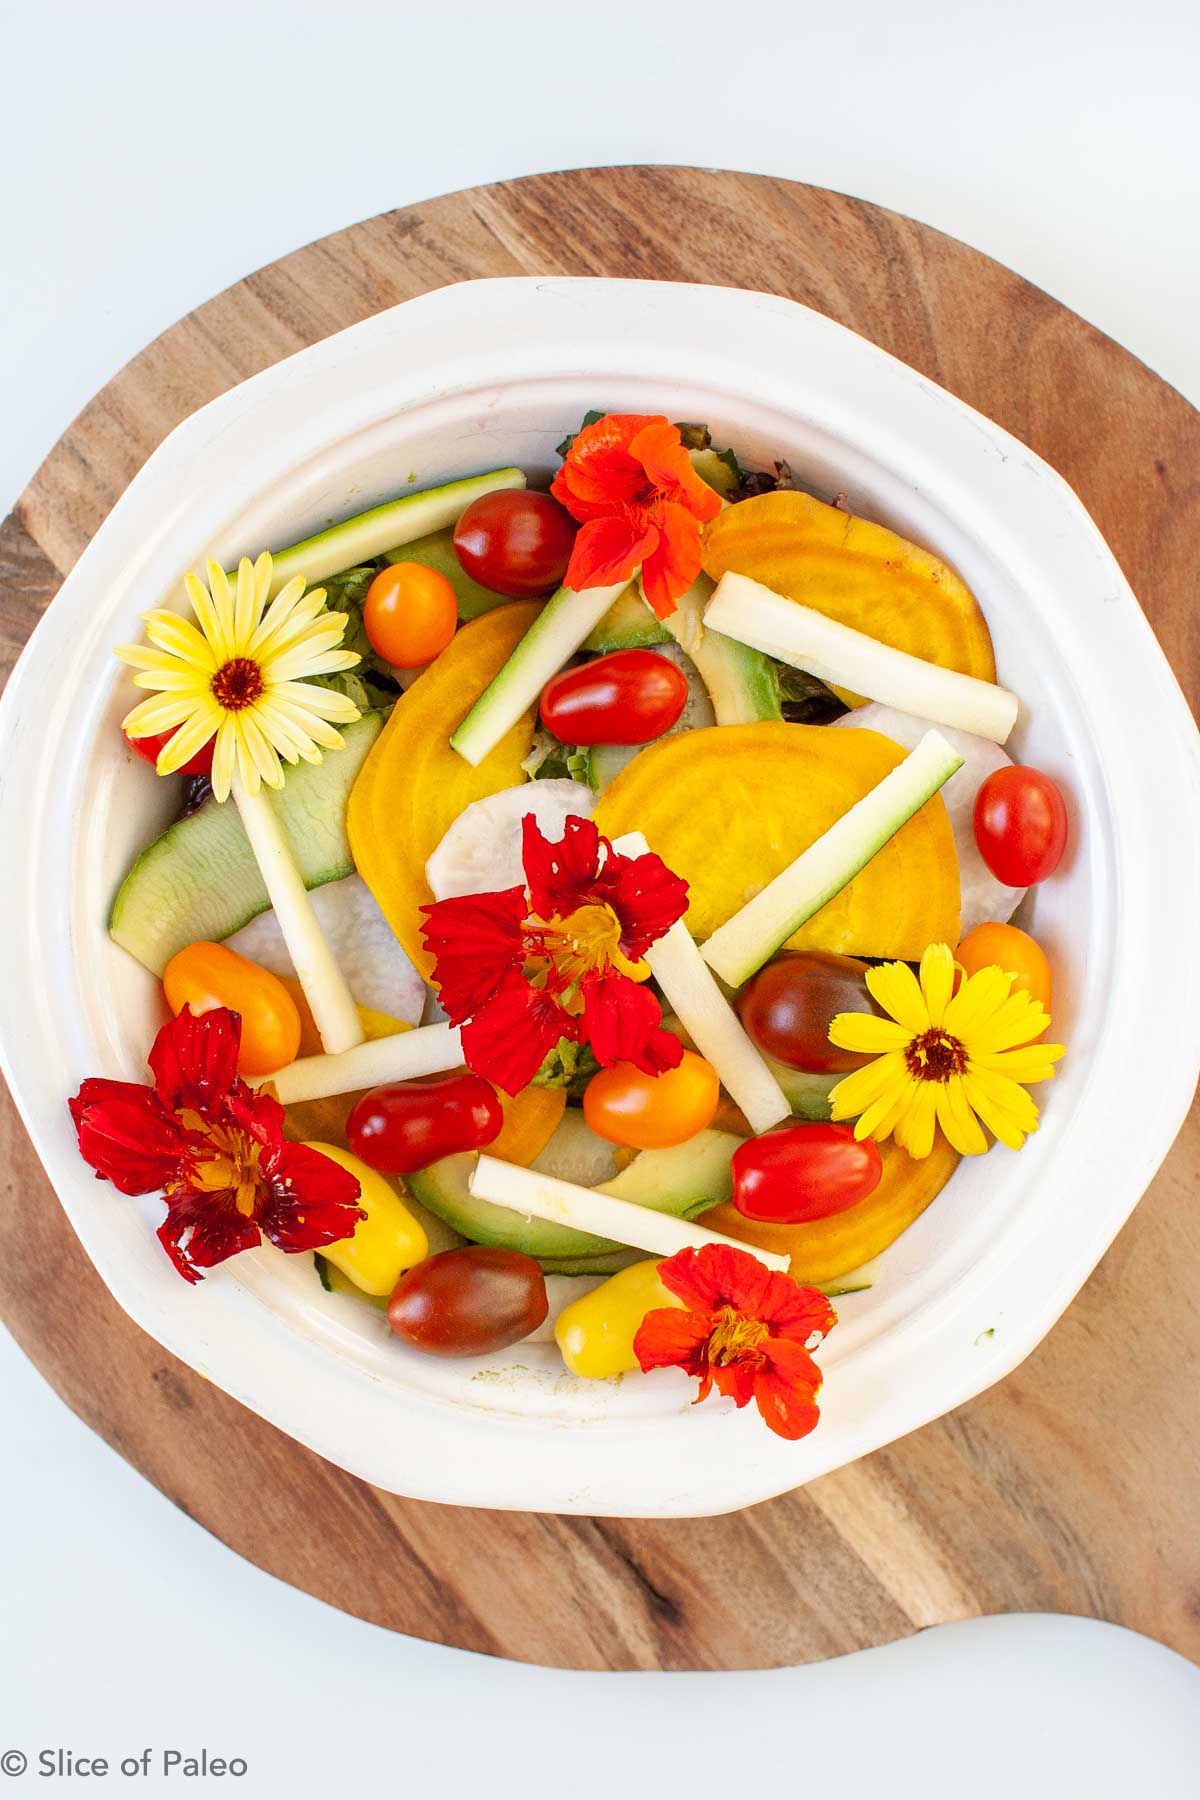 Creative Colorful & Edible Flower Salad Ideas with warm colors